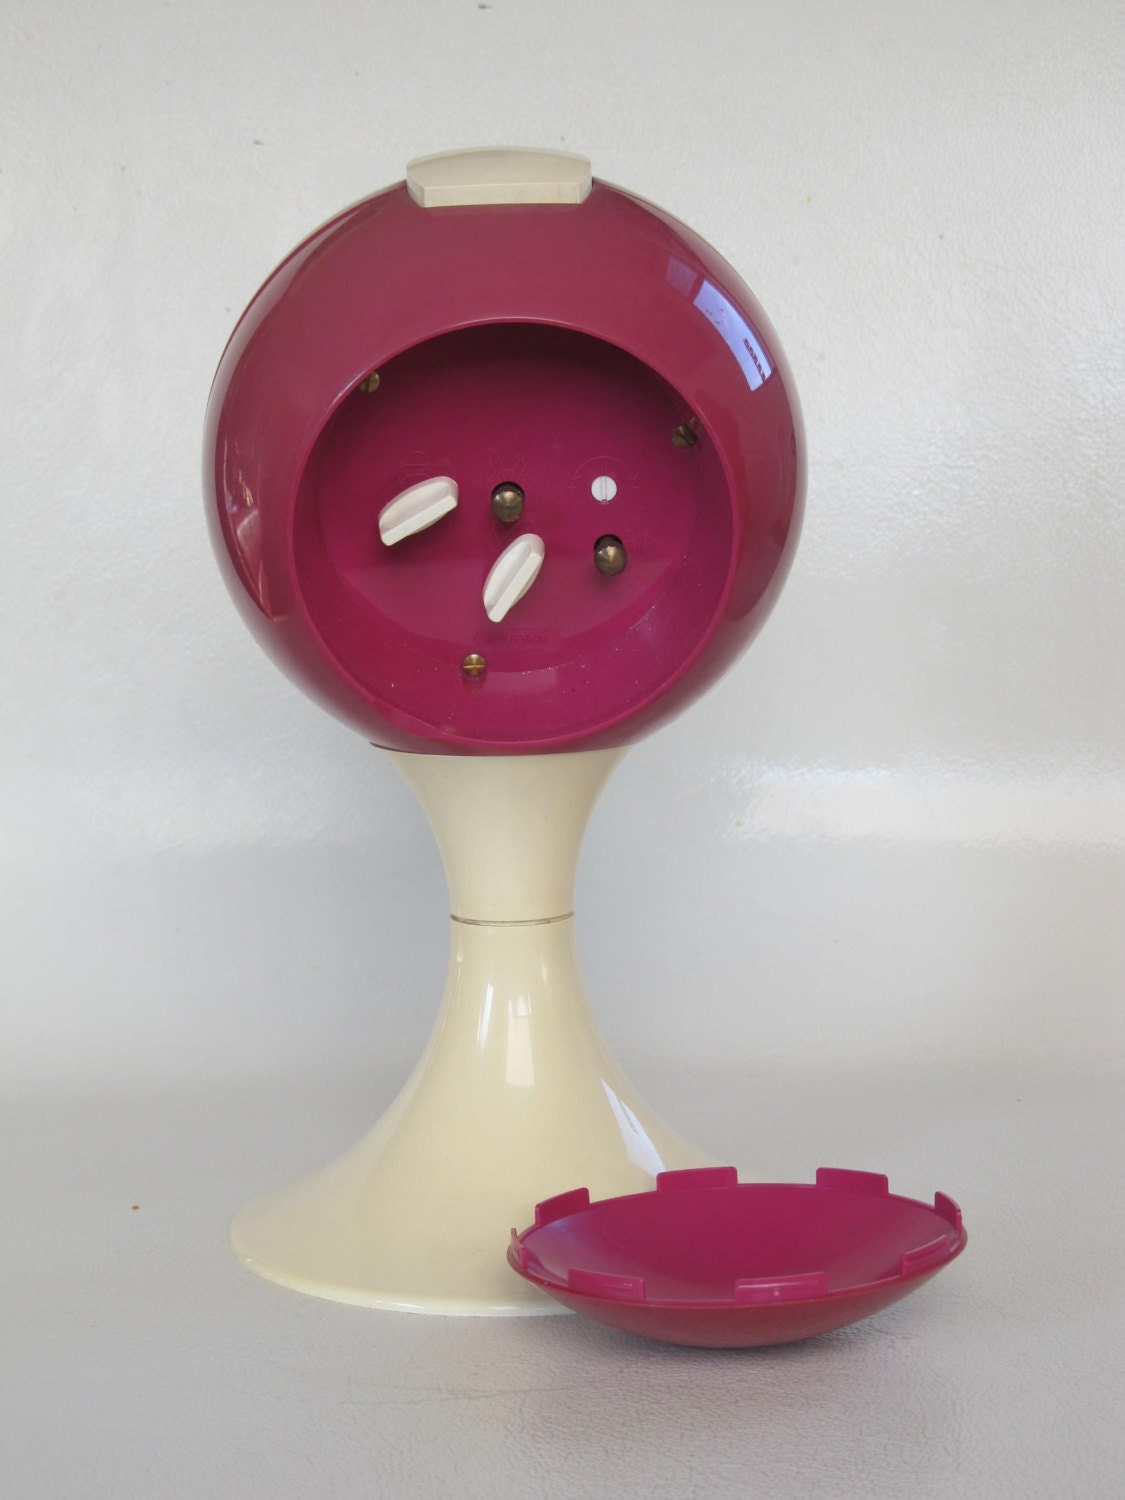 Magenta Blessing alarm clock, white pedestal tulip shape, made in Germany. Space age era, made of plastic from the early 1970s